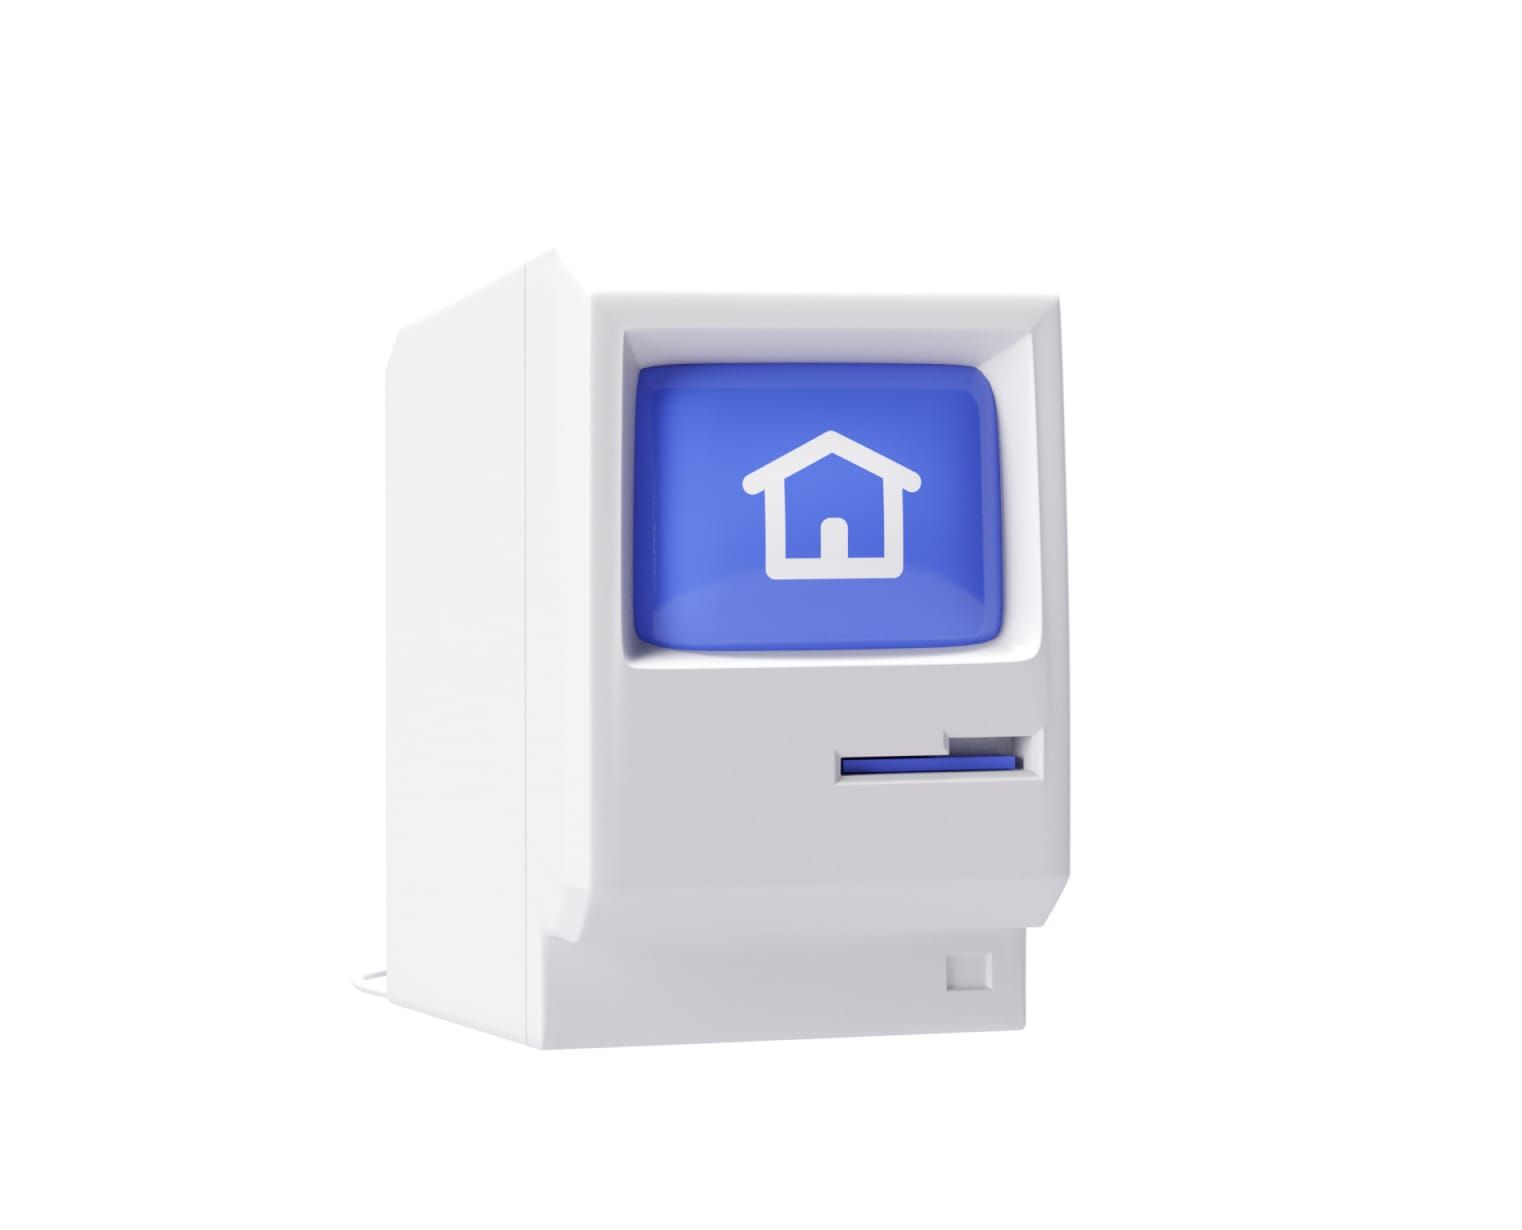 A visualisation of Macintosh displaying an illustration of a home